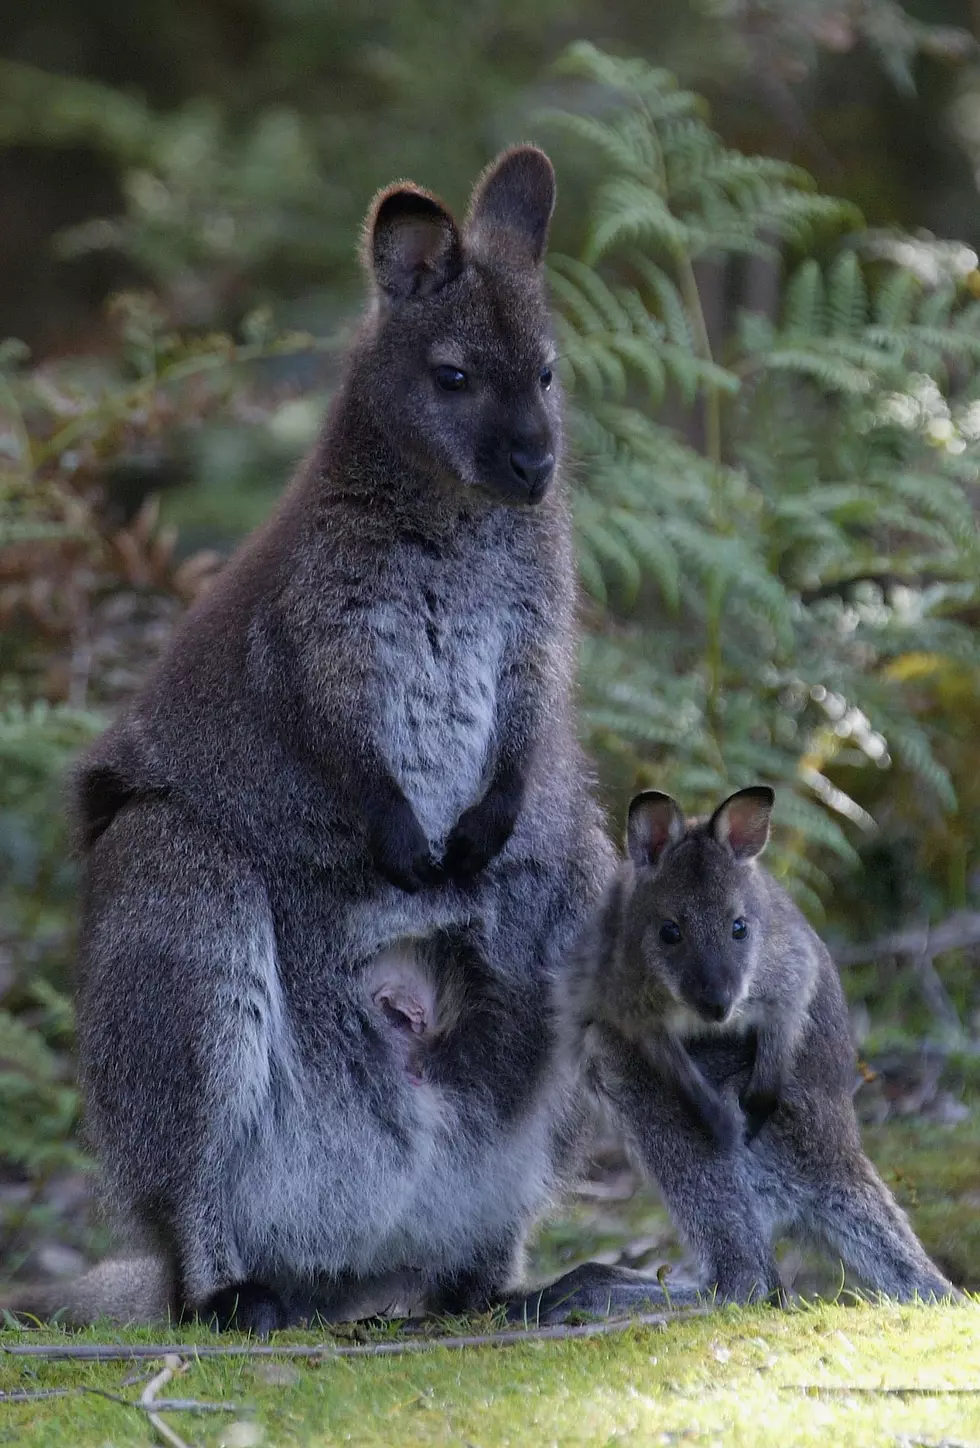 Wallaby Missing From North Salem Spotted in Patterson